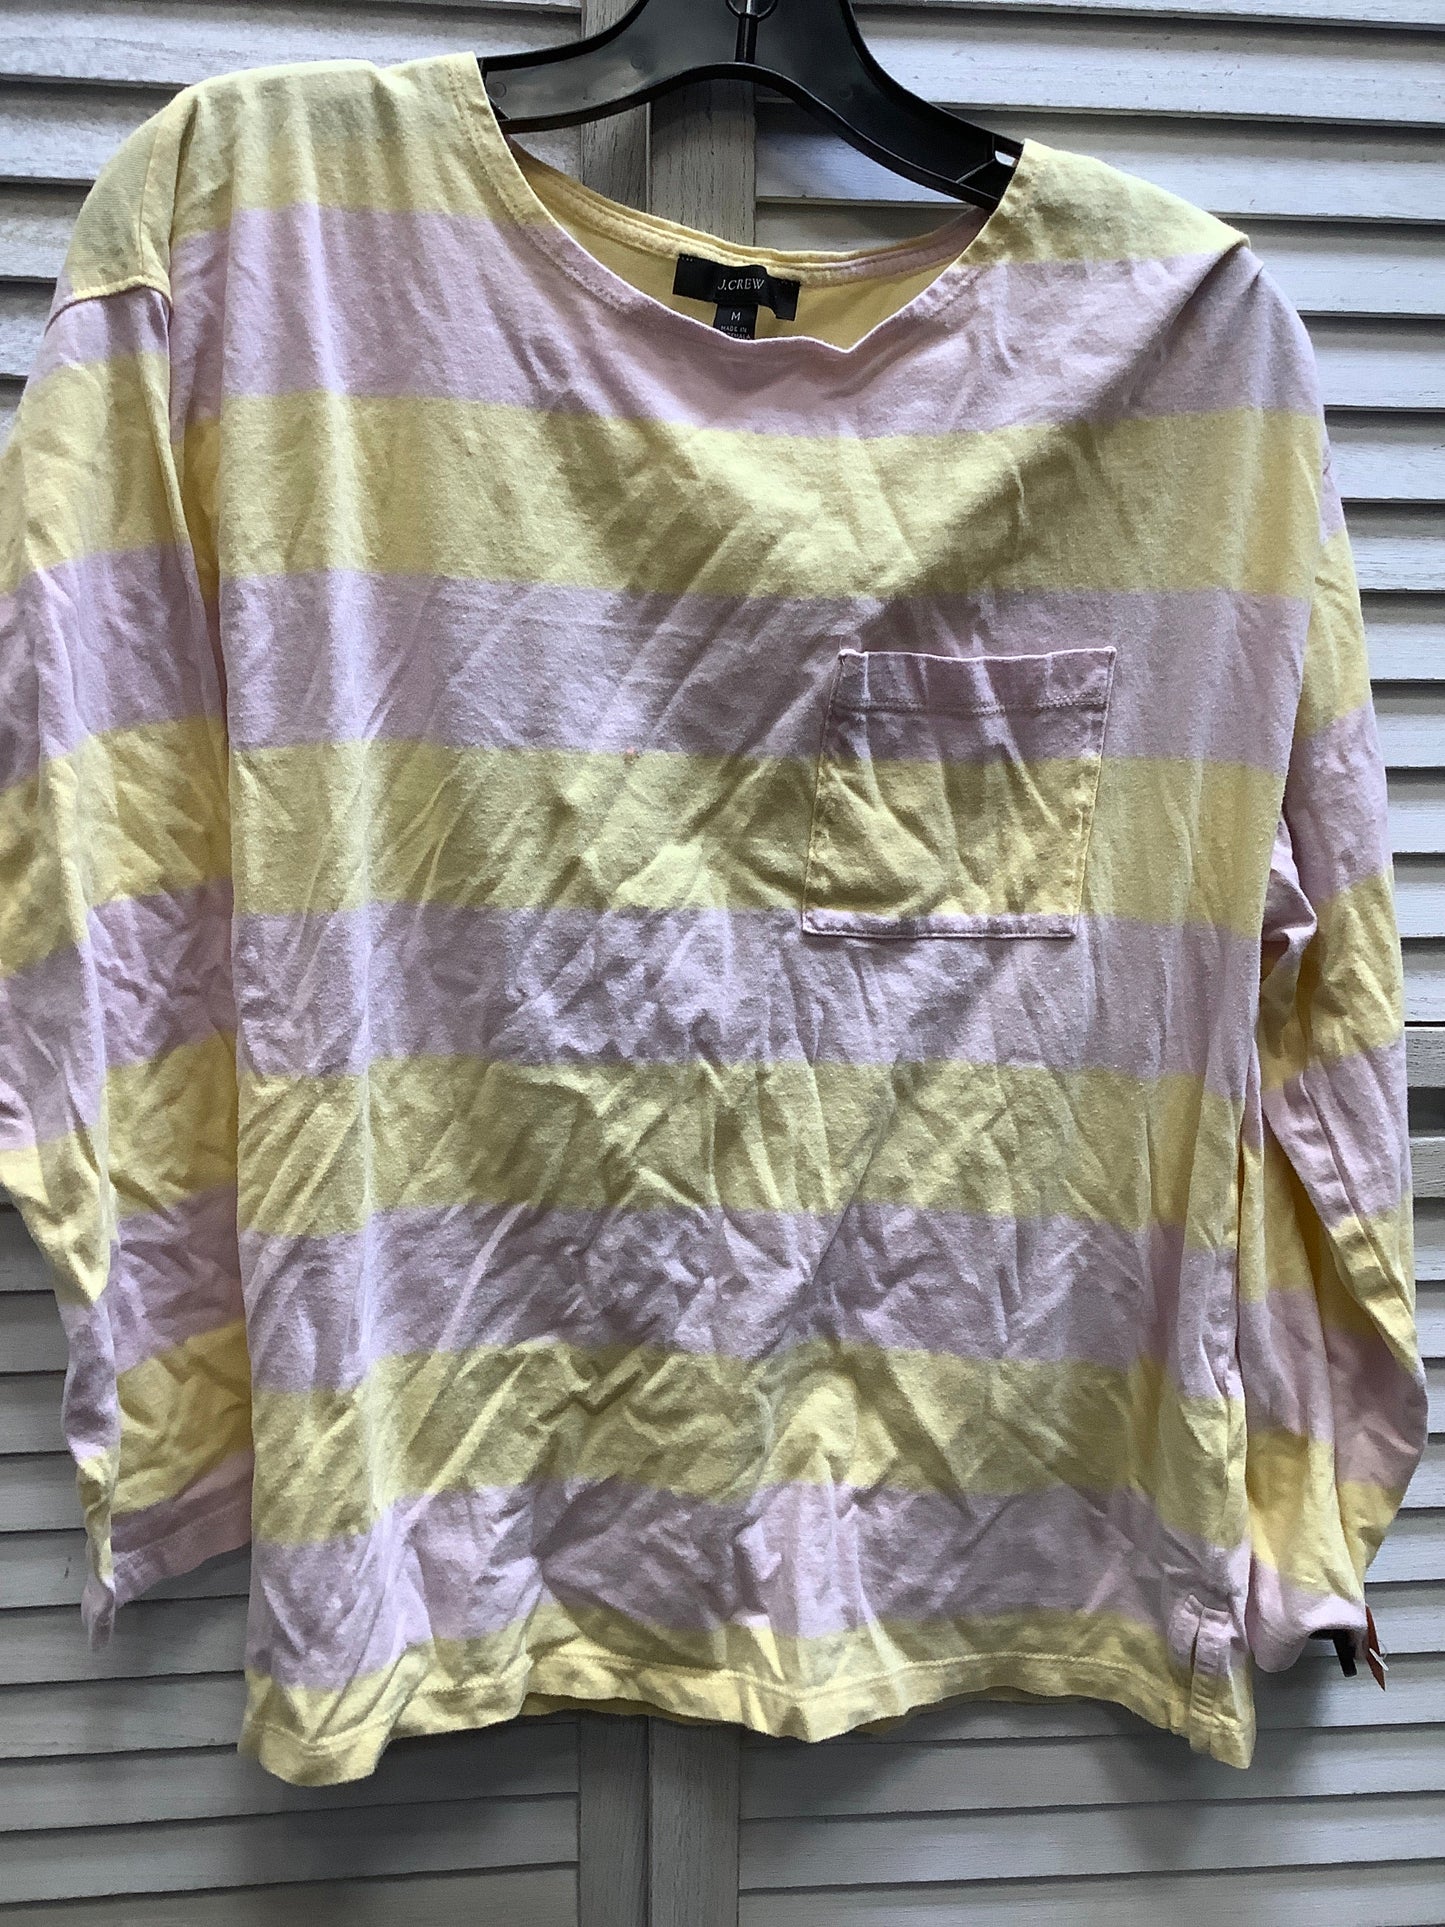 Pink & Yellow Top Long Sleeve J. Crew, Size M